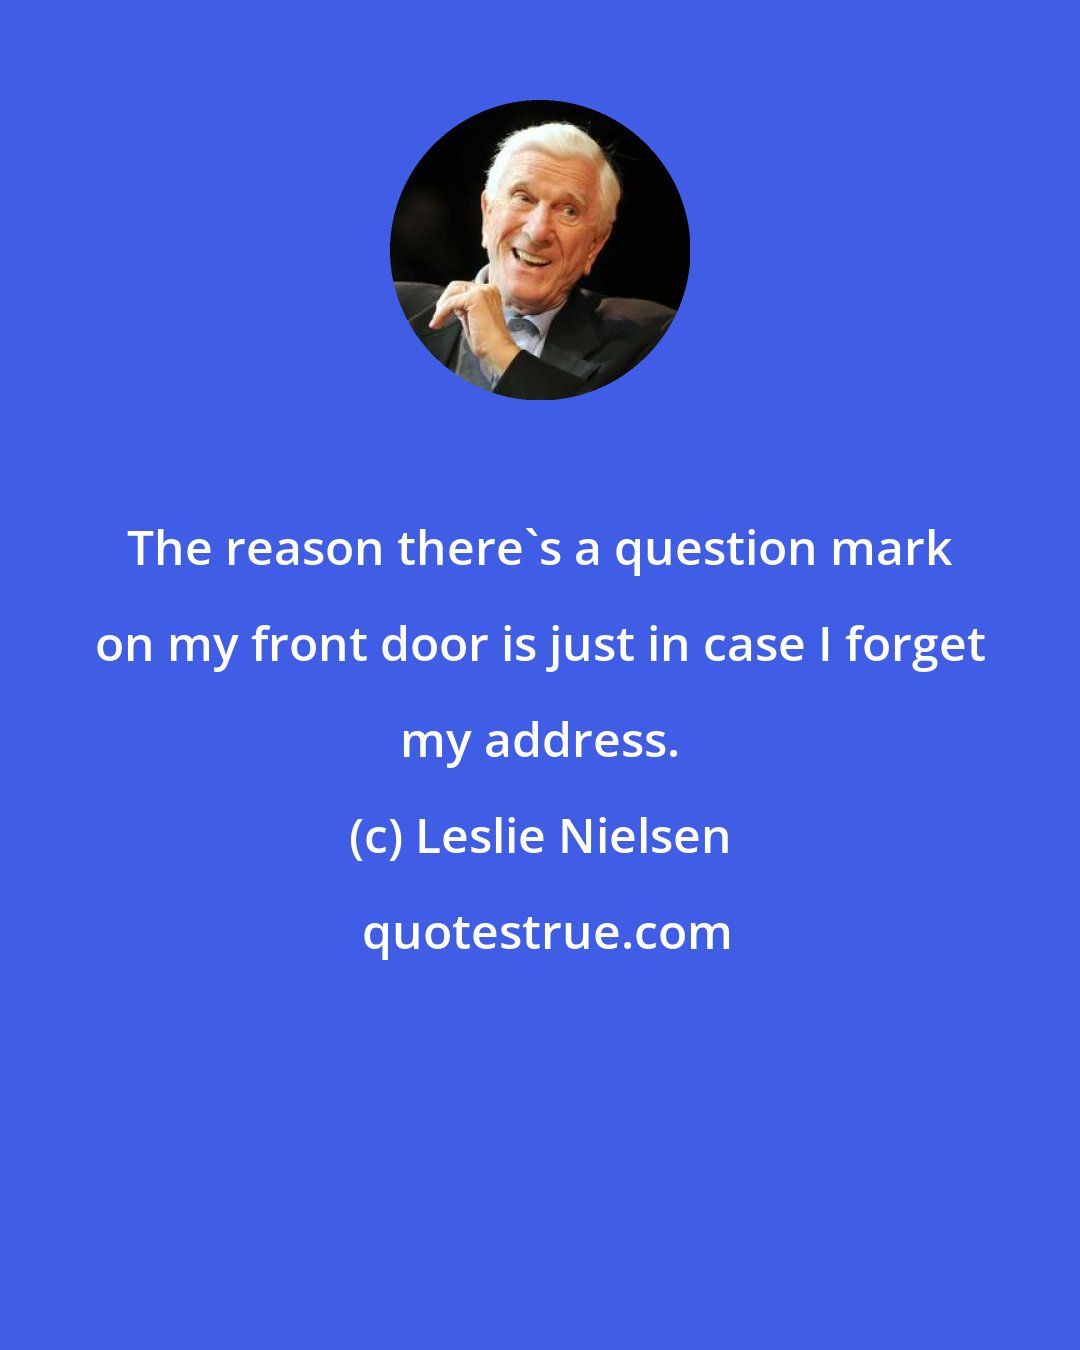 Leslie Nielsen: The reason there's a question mark on my front door is just in case I forget my address.